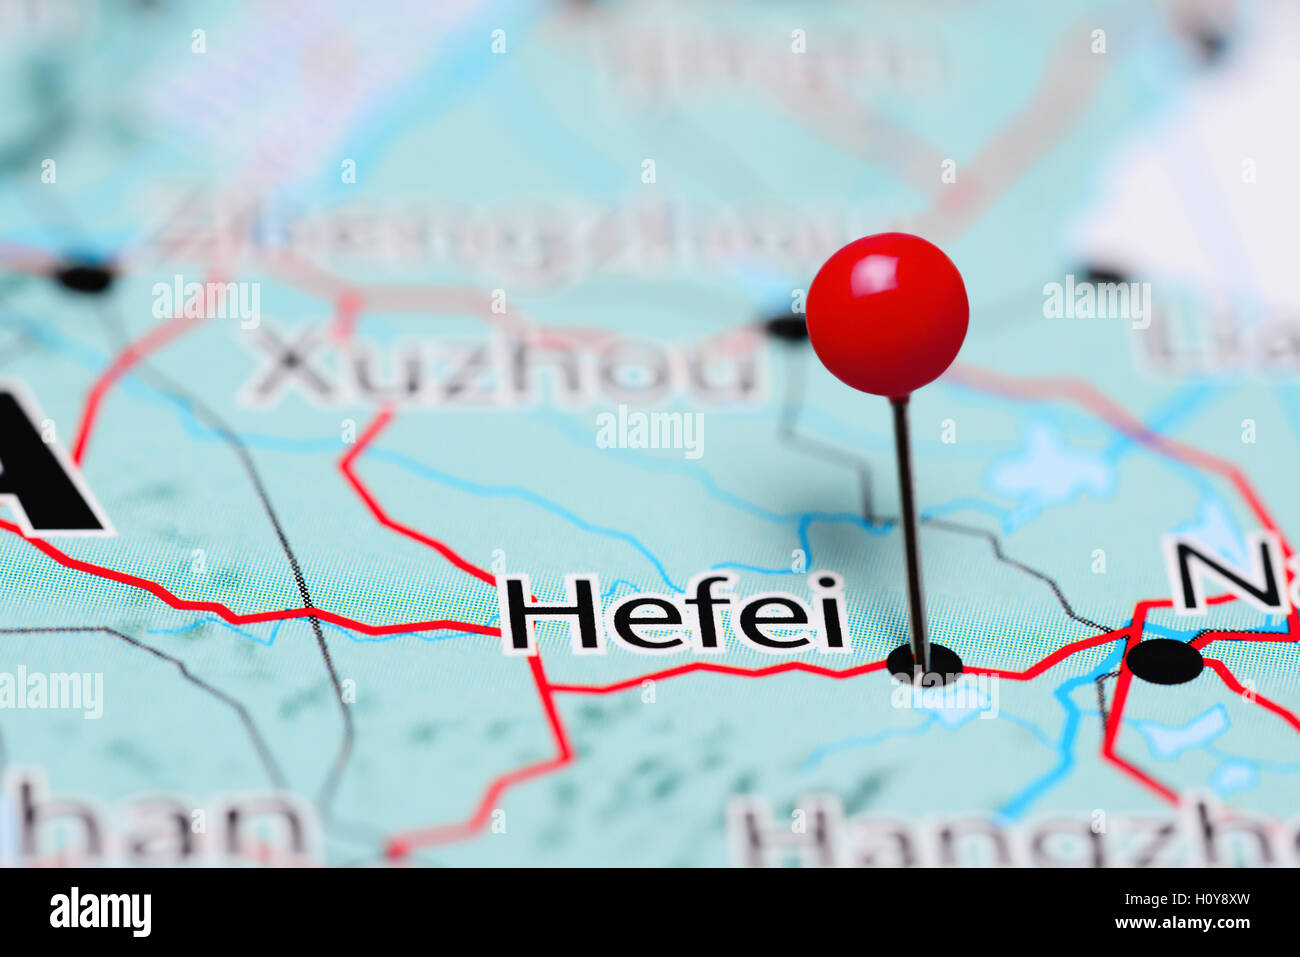 Hefei pinned on a map of China Stock Photo